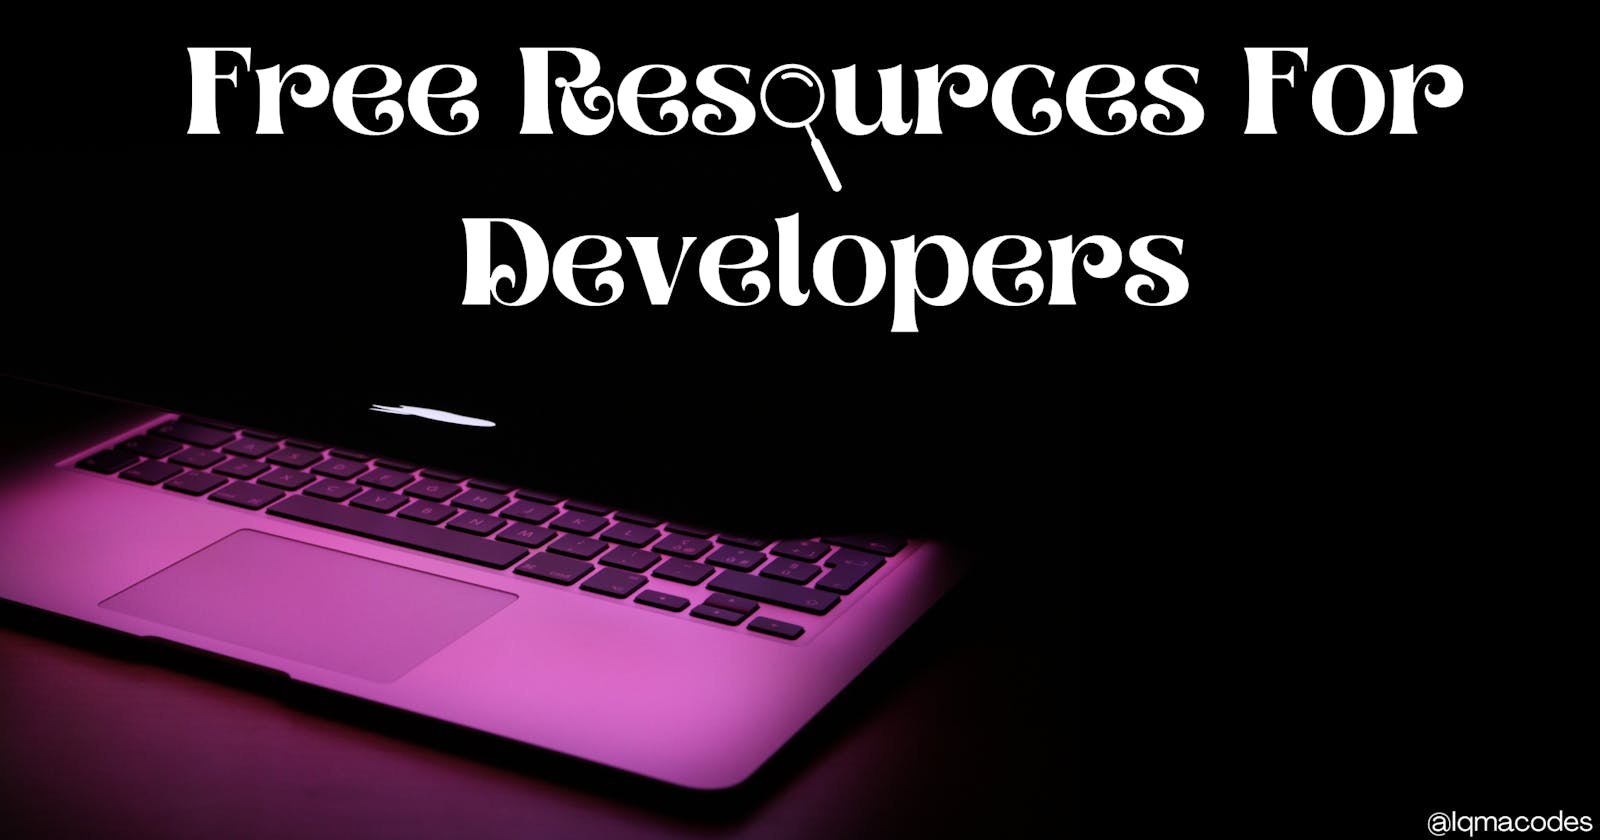 Free Resources for Developers